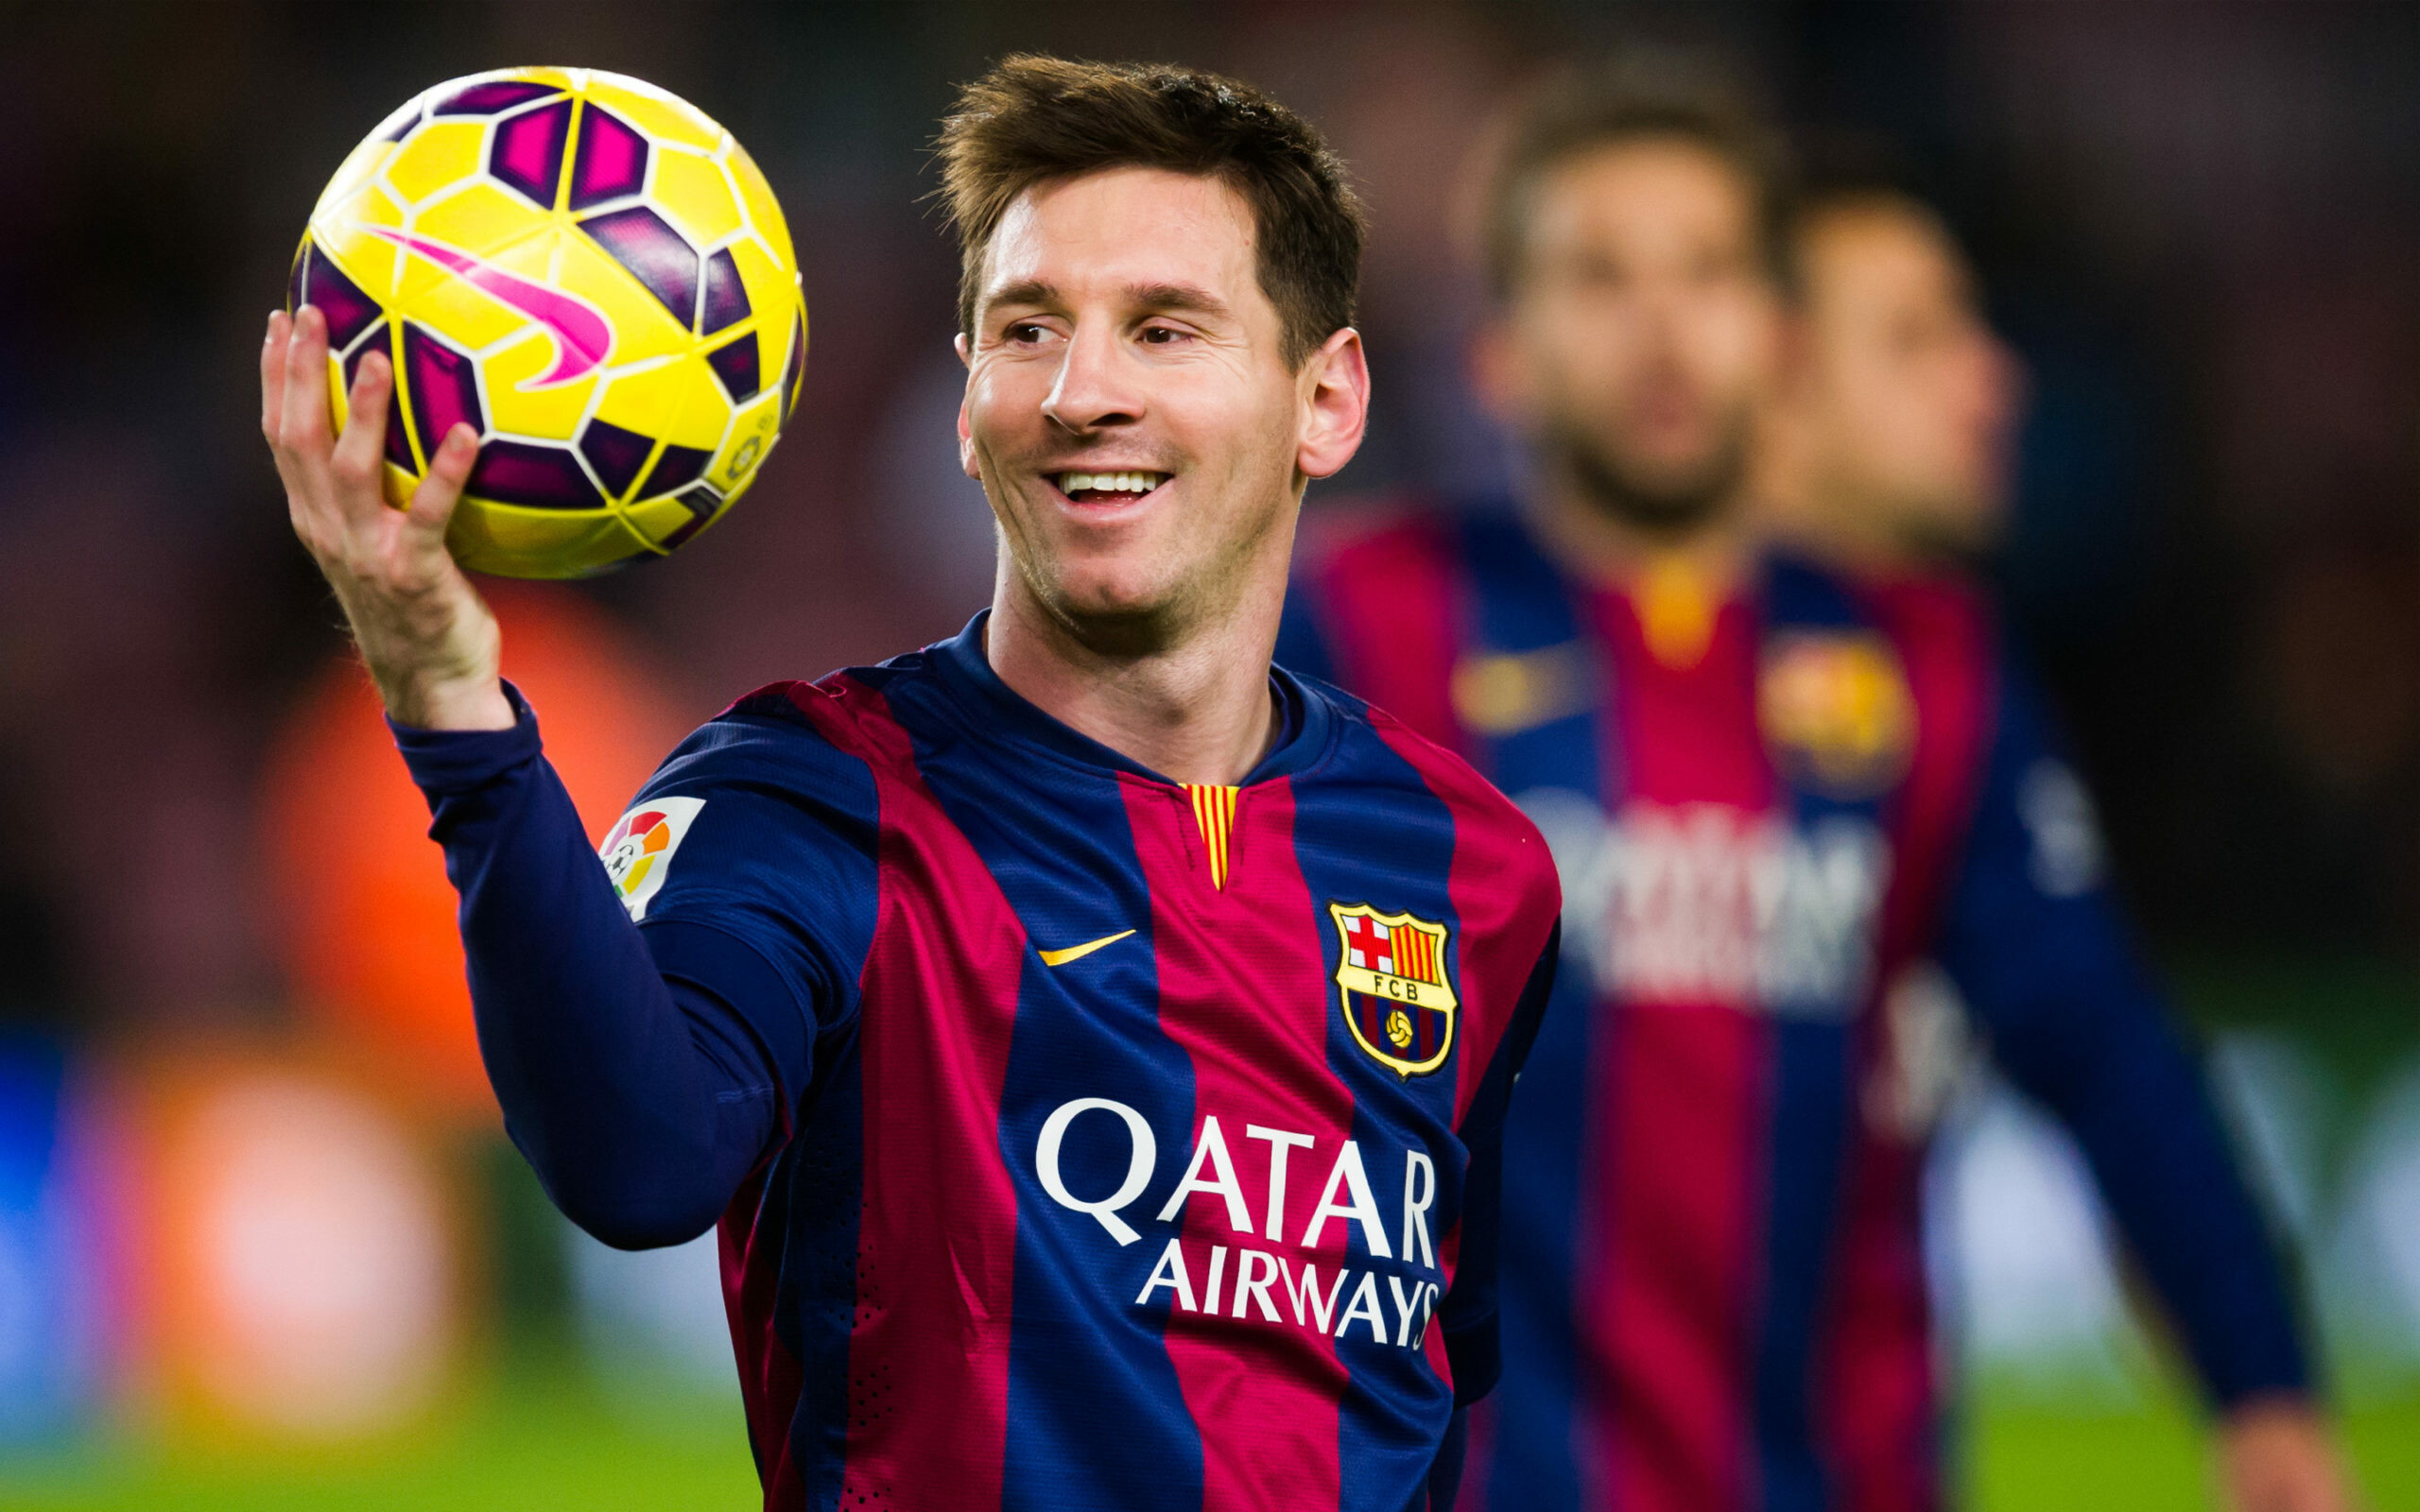 Lionel Messi: Soccer player, was named to the Ballon d'Or Dream Team in 2020. 2560x1600 HD Wallpaper.